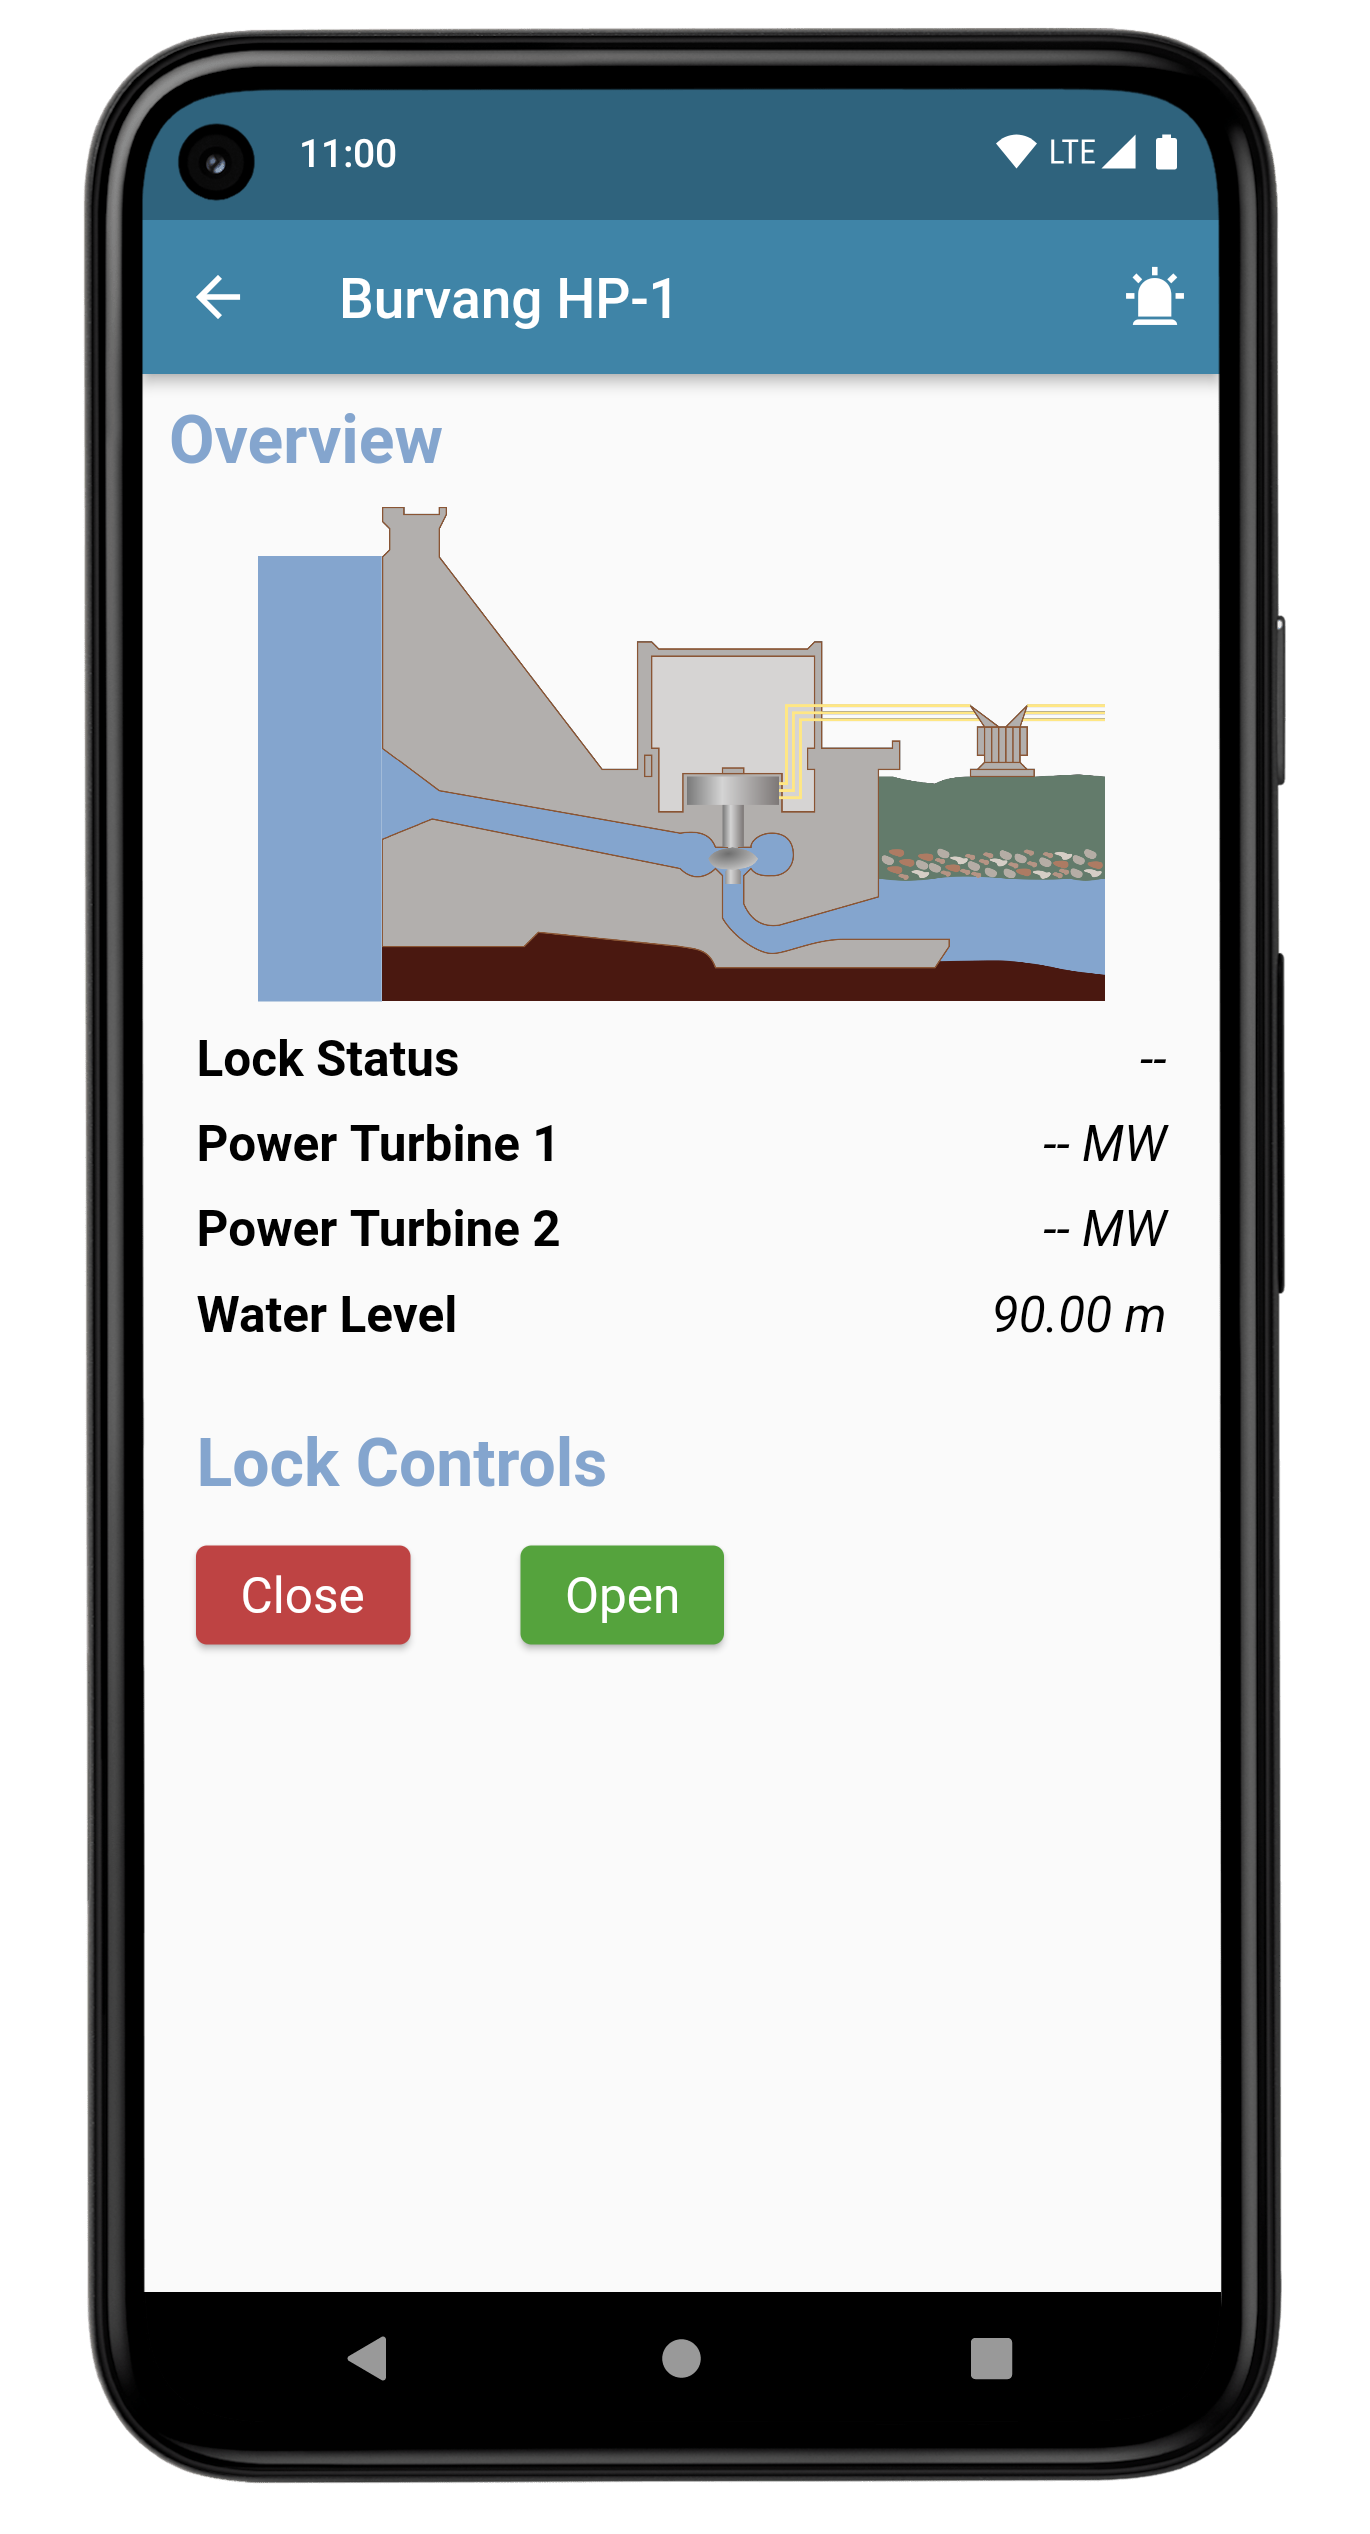 A simple app to monitor the hydroelectric power station